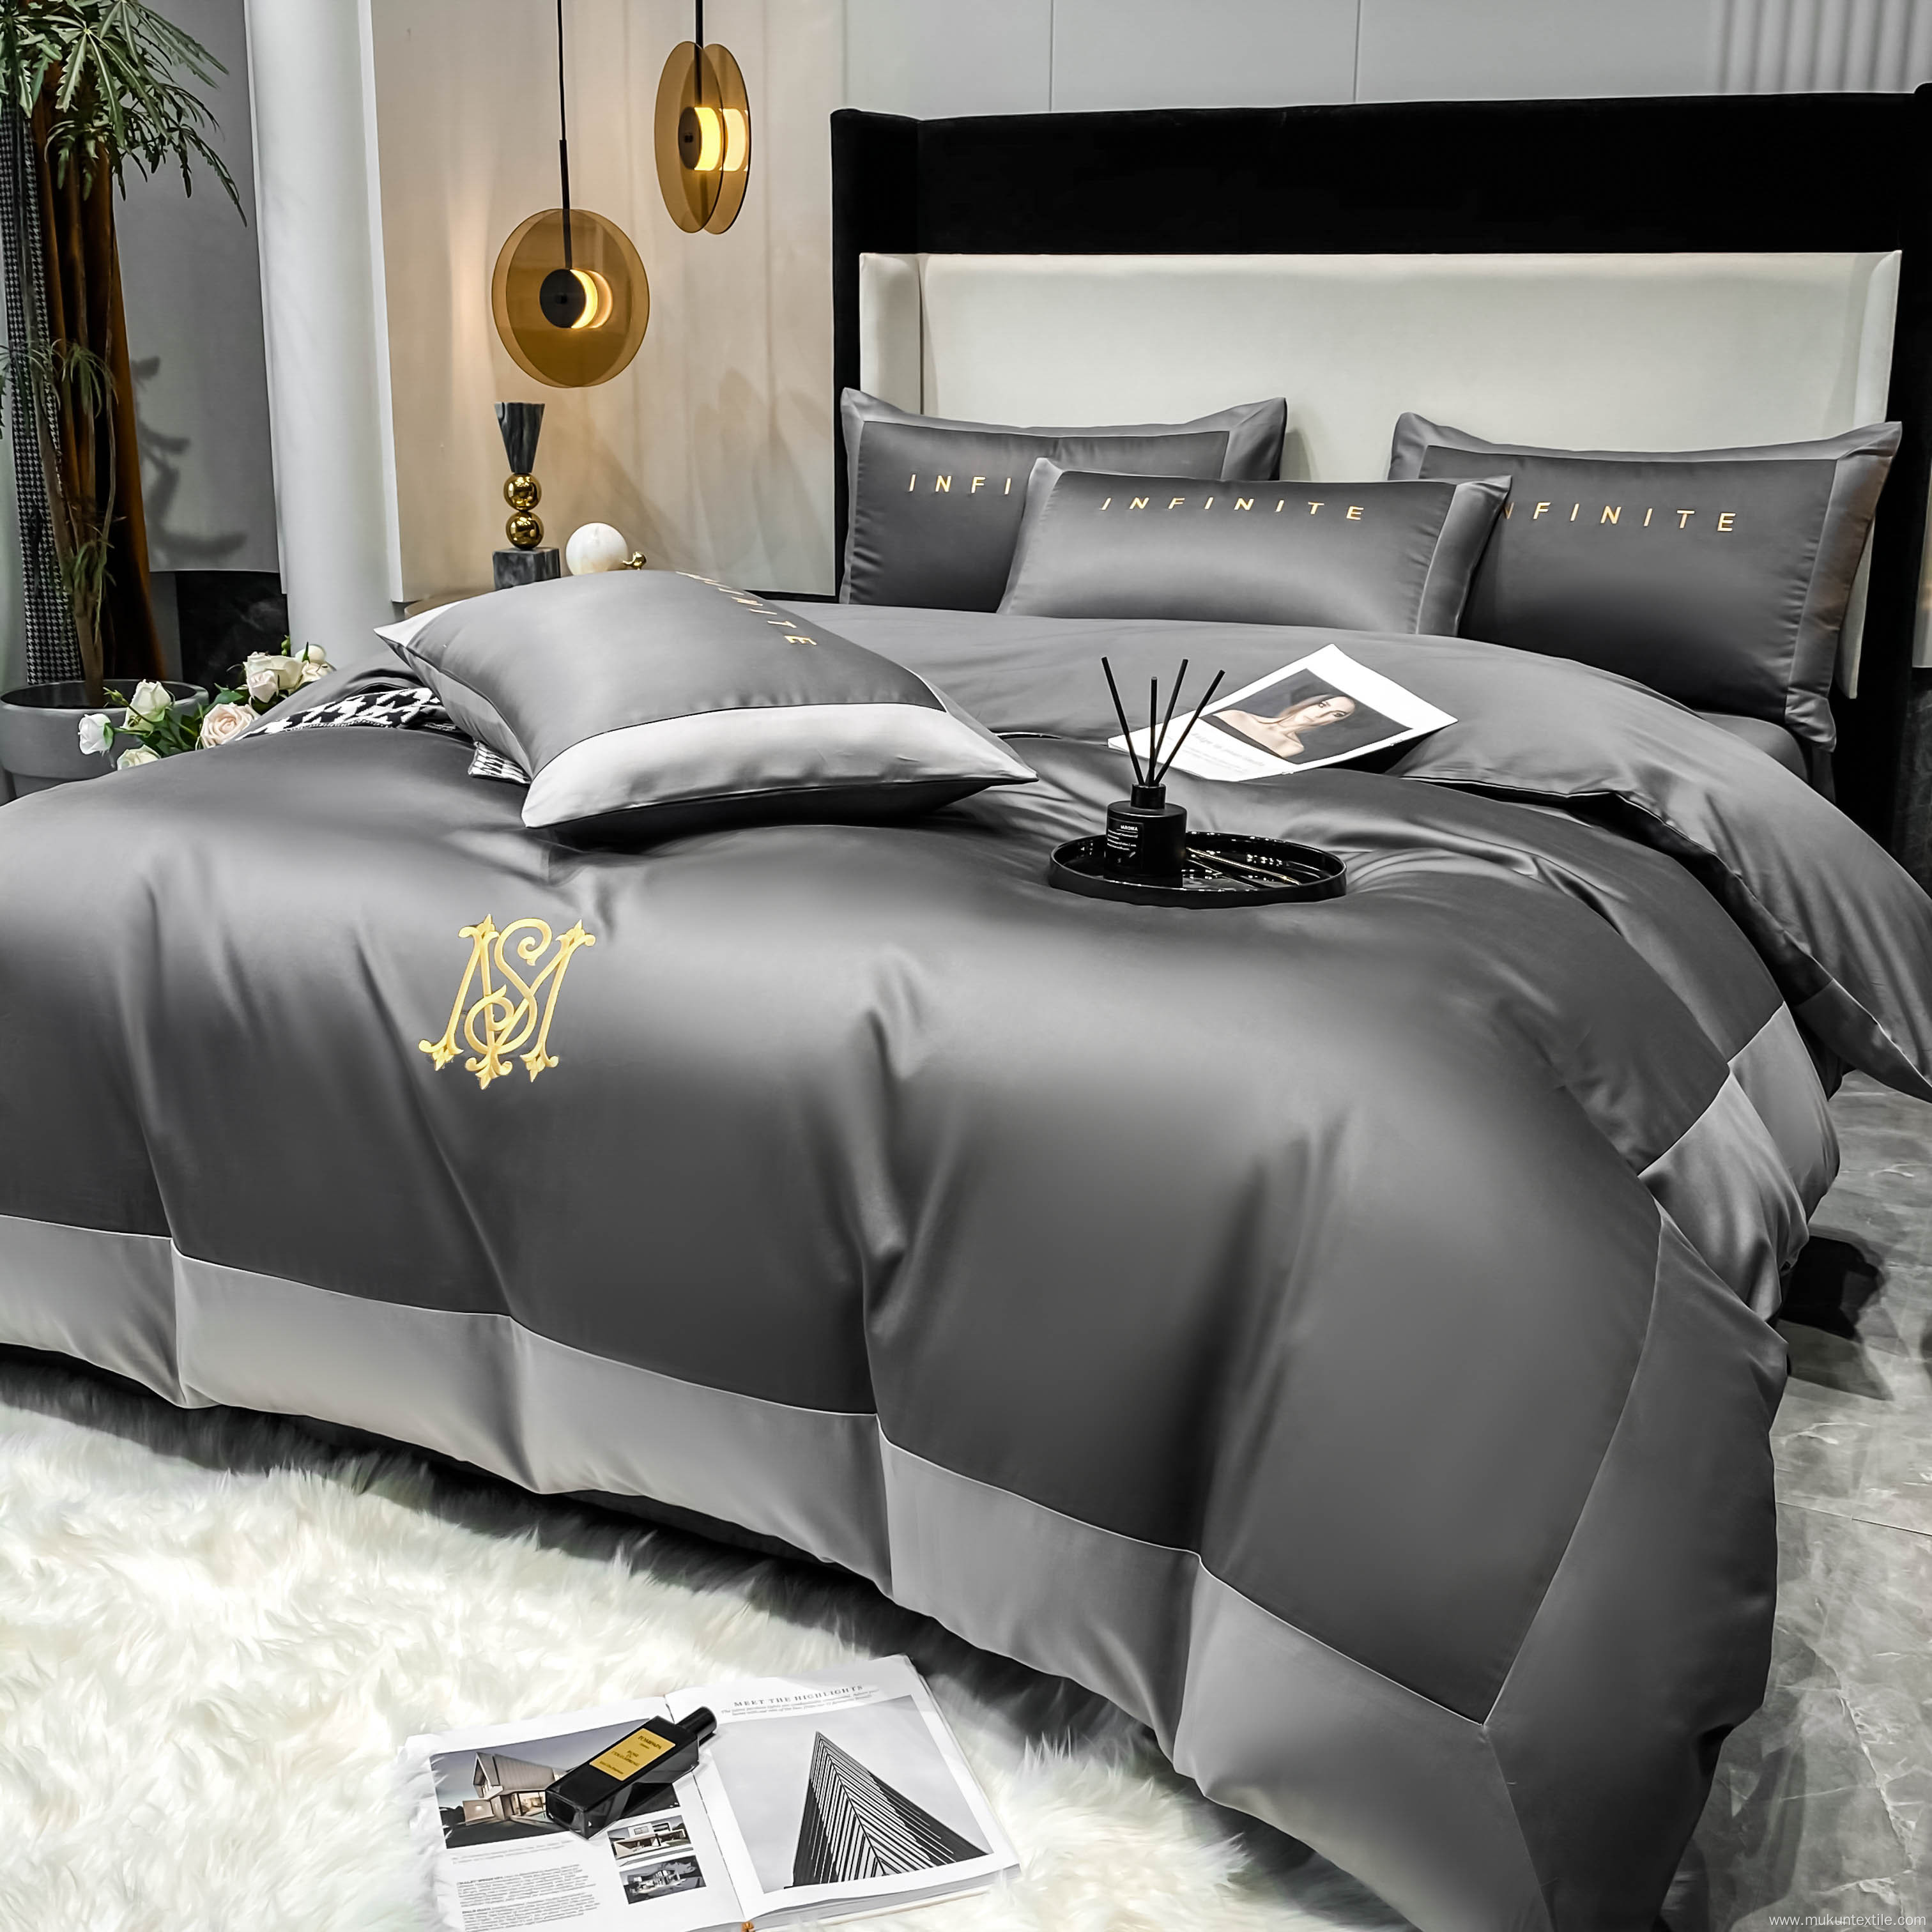 embroidery quality comforter king size cotton bedding set